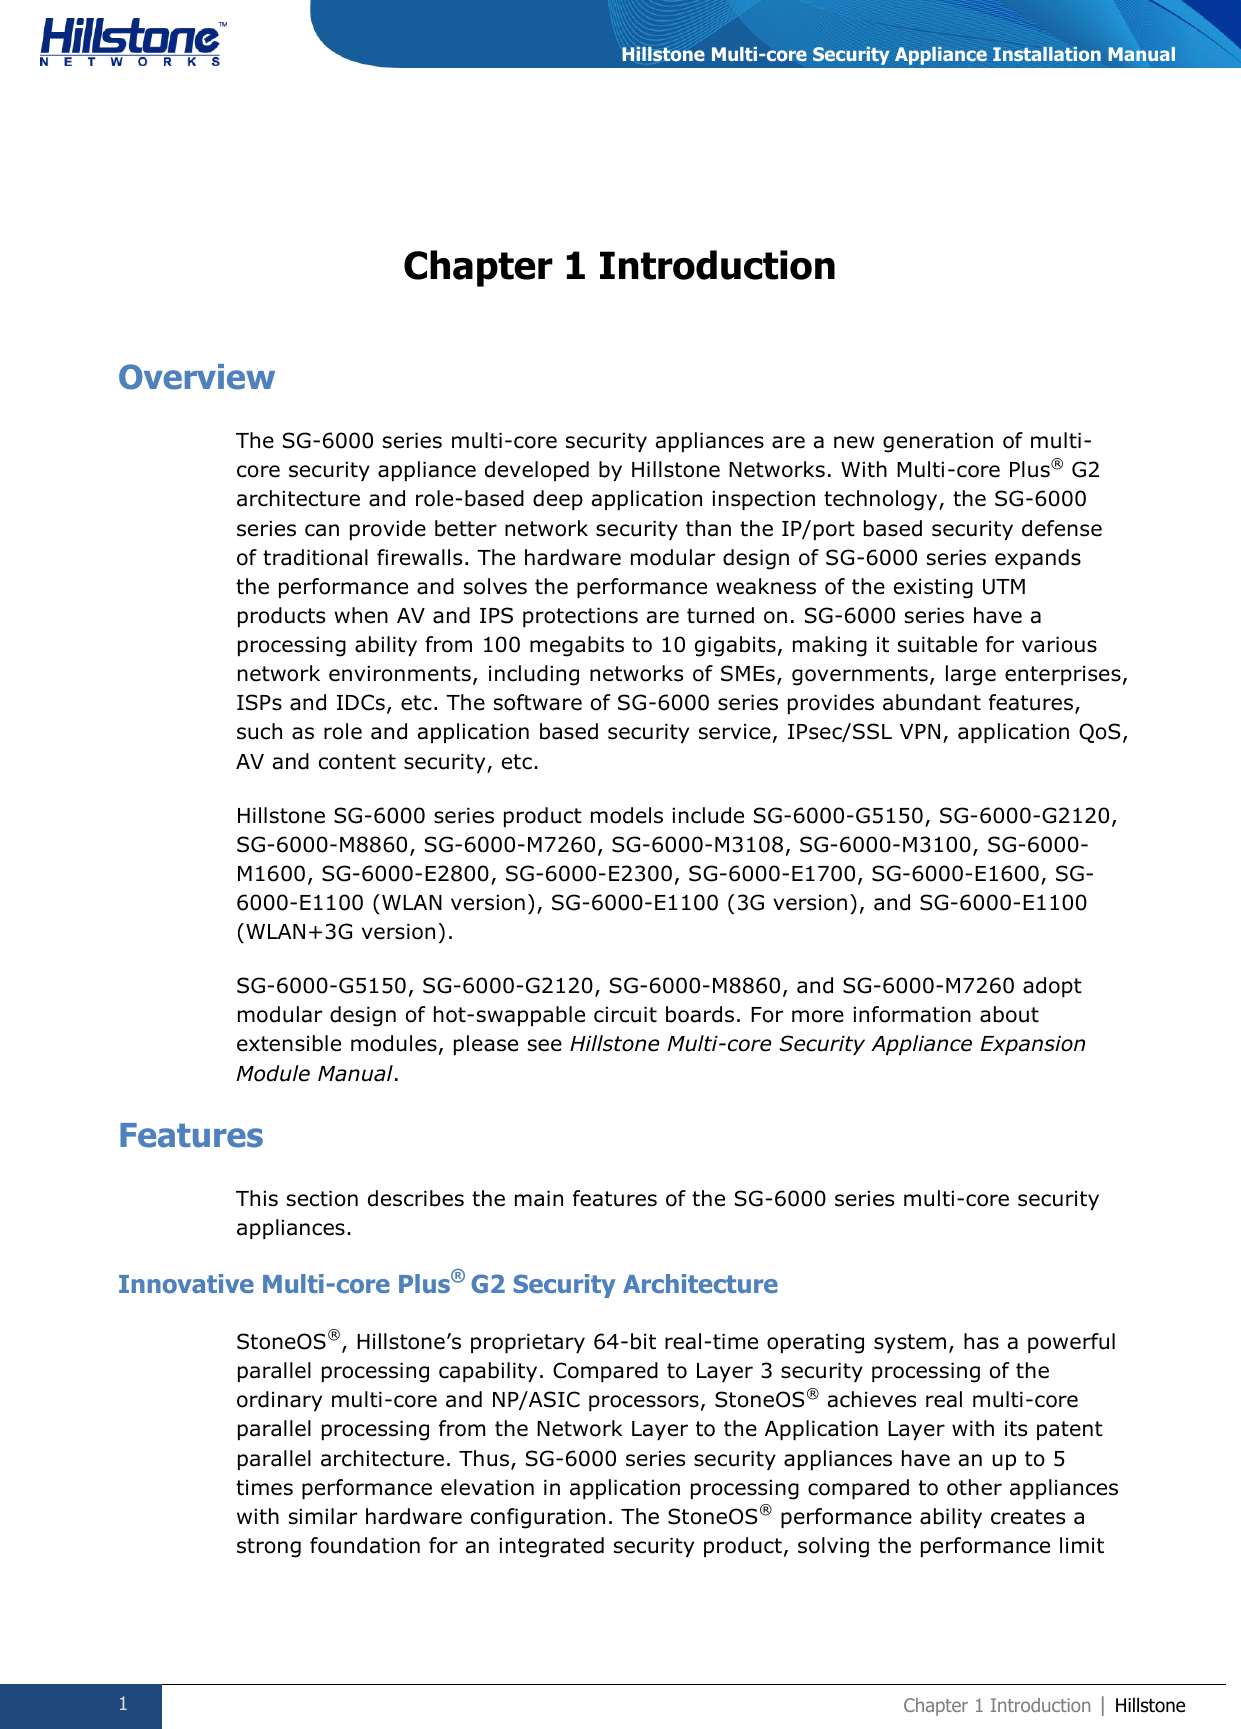  1 Chapter 1 Introduction | Hillstone  Hillstone Multi-core Security Appliance Installation Manual Chapter 1 Introduction Overview The SG-6000 series multi-core security appliances are a new generation of multi-core security appliance developed by Hillstone Networks. With Multi-core Plus® G2 architecture and role-based deep application inspection technology, the SG-6000 series can provide better network security than the IP/port based security defense of traditional firewalls. The hardware modular design of SG-6000 series expands the performance and solves the performance weakness of the existing UTM products when AV and IPS protections are turned on. SG-6000 series have a processing ability from 100 megabits to 10 gigabits, making it suitable for various network environments, including networks of SMEs, governments, large enterprises, ISPs and IDCs, etc. The software of SG-6000 series provides abundant features, such as role and application based security service, IPsec/SSL VPN, application QoS, AV and content security, etc. Hillstone SG-6000 series product models include SG-6000-G5150, SG-6000-G2120, SG-6000-M8860, SG-6000-M7260, SG-6000-M3108, SG-6000-M3100, SG-6000-M1600, SG-6000-E2800, SG-6000-E2300, SG-6000-E1700, SG-6000-E1600, SG-6000-E1100 (WLAN version), SG-6000-E1100 (3G version), and SG-6000-E1100 (WLAN+3G version). SG-6000-G5150, SG-6000-G2120, SG-6000-M8860, and SG-6000-M7260 adopt modular design of hot-swappable circuit boards. For more information about extensible modules, please see Hillstone Multi-core Security Appliance Expansion Module Manual. Features This section describes the main features of the SG-6000 series multi-core security appliances. Innovative Multi-core Plus®  G2 Security Architecture StoneOS®, Hillstone’s proprietary 64-bit real-time operating system, has a powerful parallel processing capability. Compared to Layer 3 security processing of the ordinary multi-core and NP/ASIC processors, StoneOS® achieves real multi-core parallel processing from the Network Layer to the Application Layer with its patent parallel architecture. Thus, SG-6000 series security appliances have an up to 5 times performance elevation in application processing compared to other appliances with similar hardware configuration. The StoneOS® performance ability creates a strong foundation for an integrated security product, solving the performance limit 